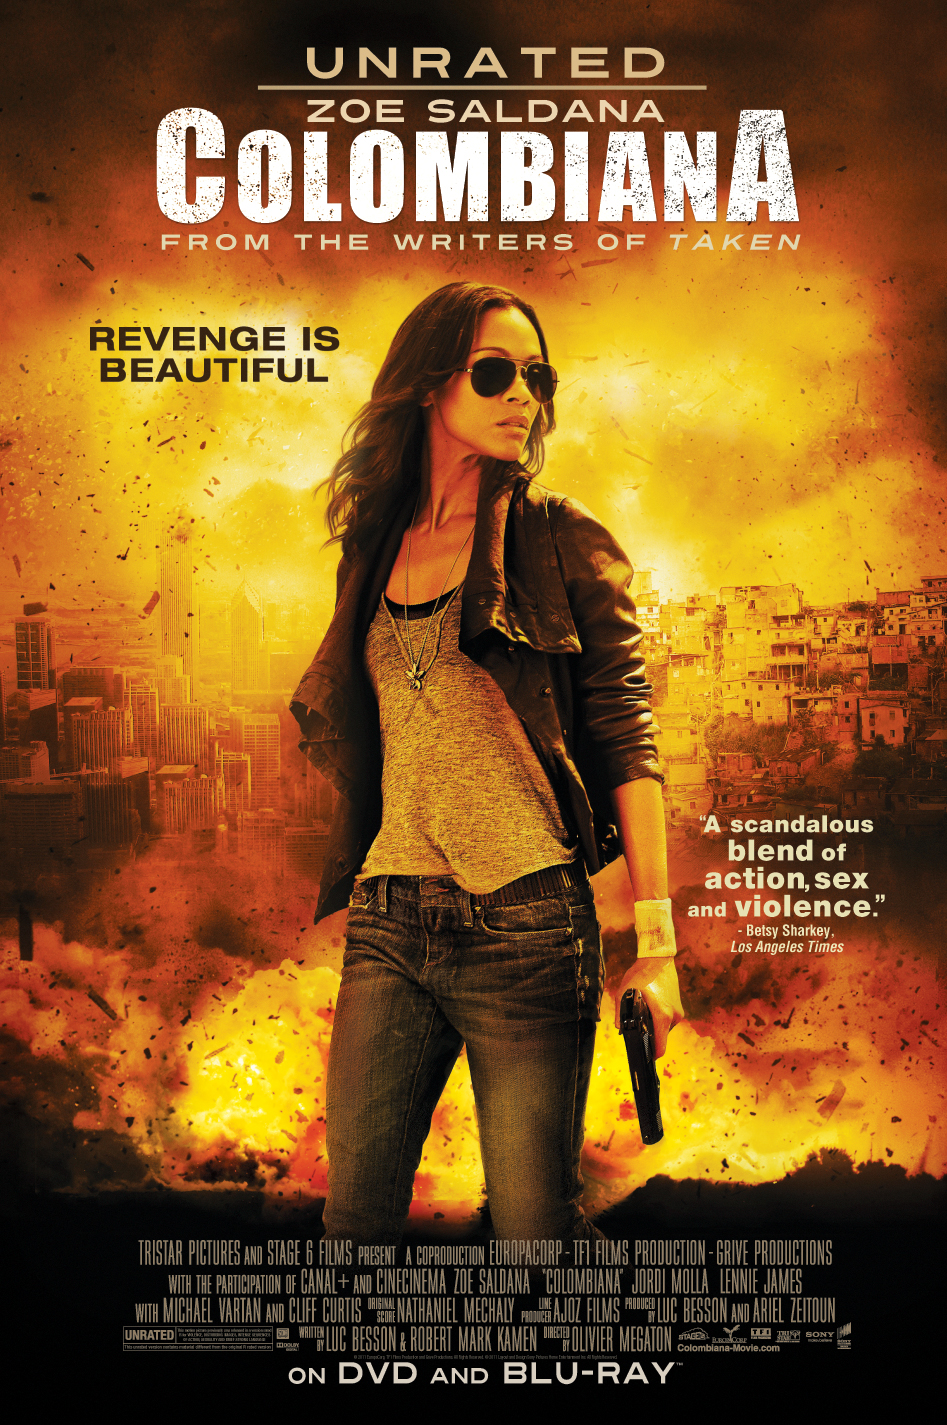 http://s3.picofile.com/file/8209179484/COLOMBIANA_Poster.jpg